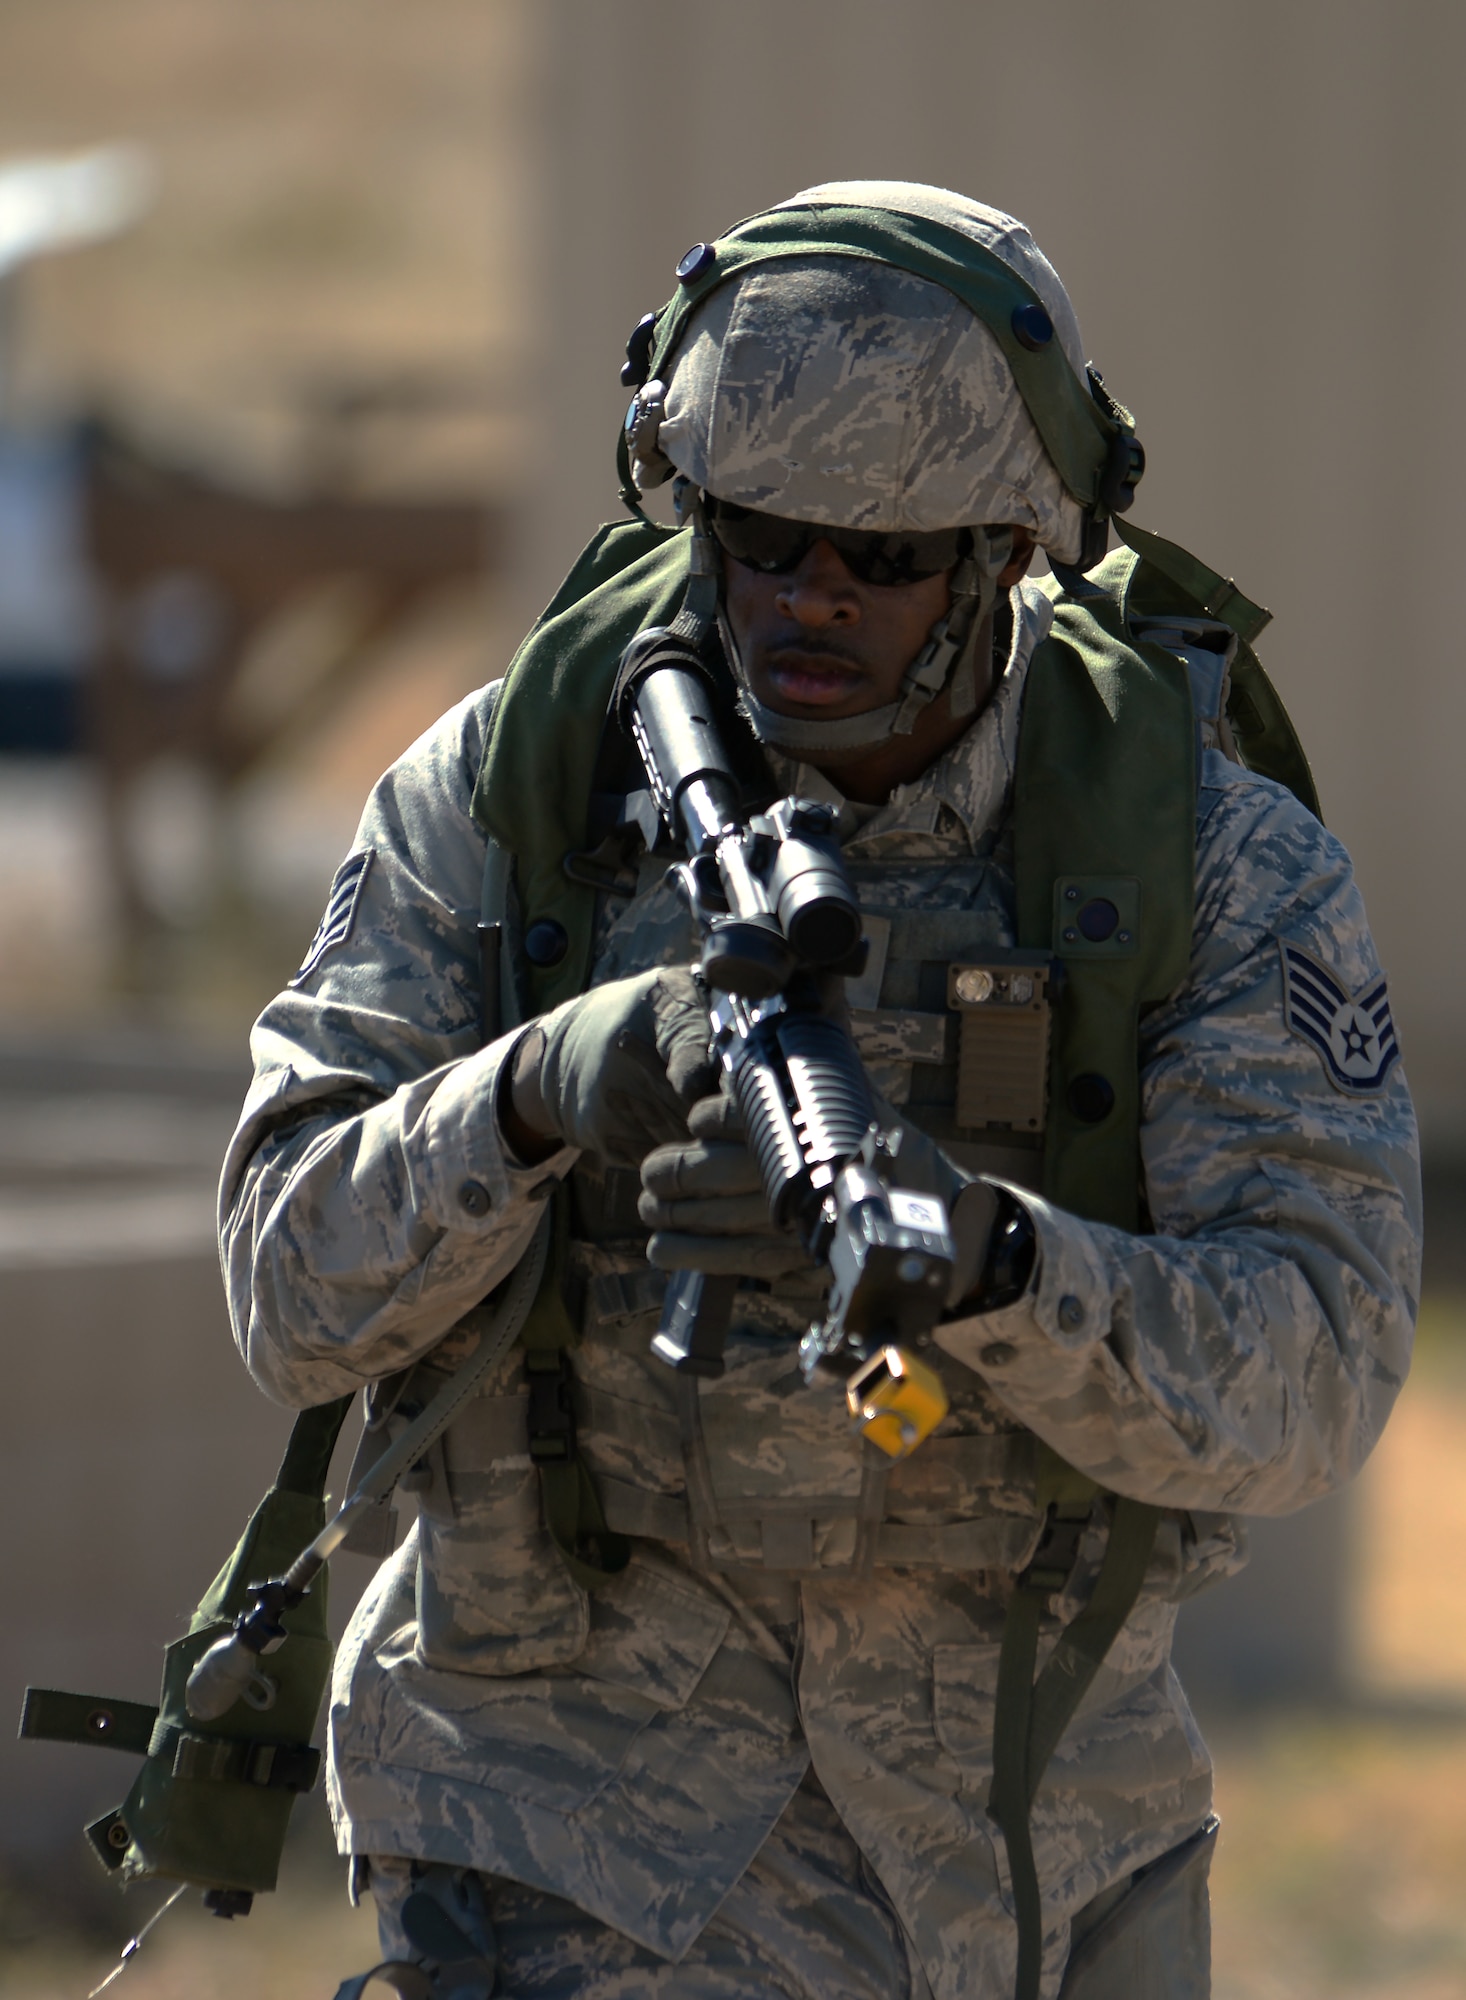 Staff Sgt. Joshua Hill, 307th Bomb Wing, Barksdale Air Force Base, La., moves towards a building Sept. 24, 2015, during the tactical recapture portion of the 2015 Global Strike Challenge security forces competition on Camp Guernsey, Wyo. Teams had to search through a village for a missing asset that had been stolen by opposing forces. (U.S. Air Force photo by Senior Airman Brandon Valle)